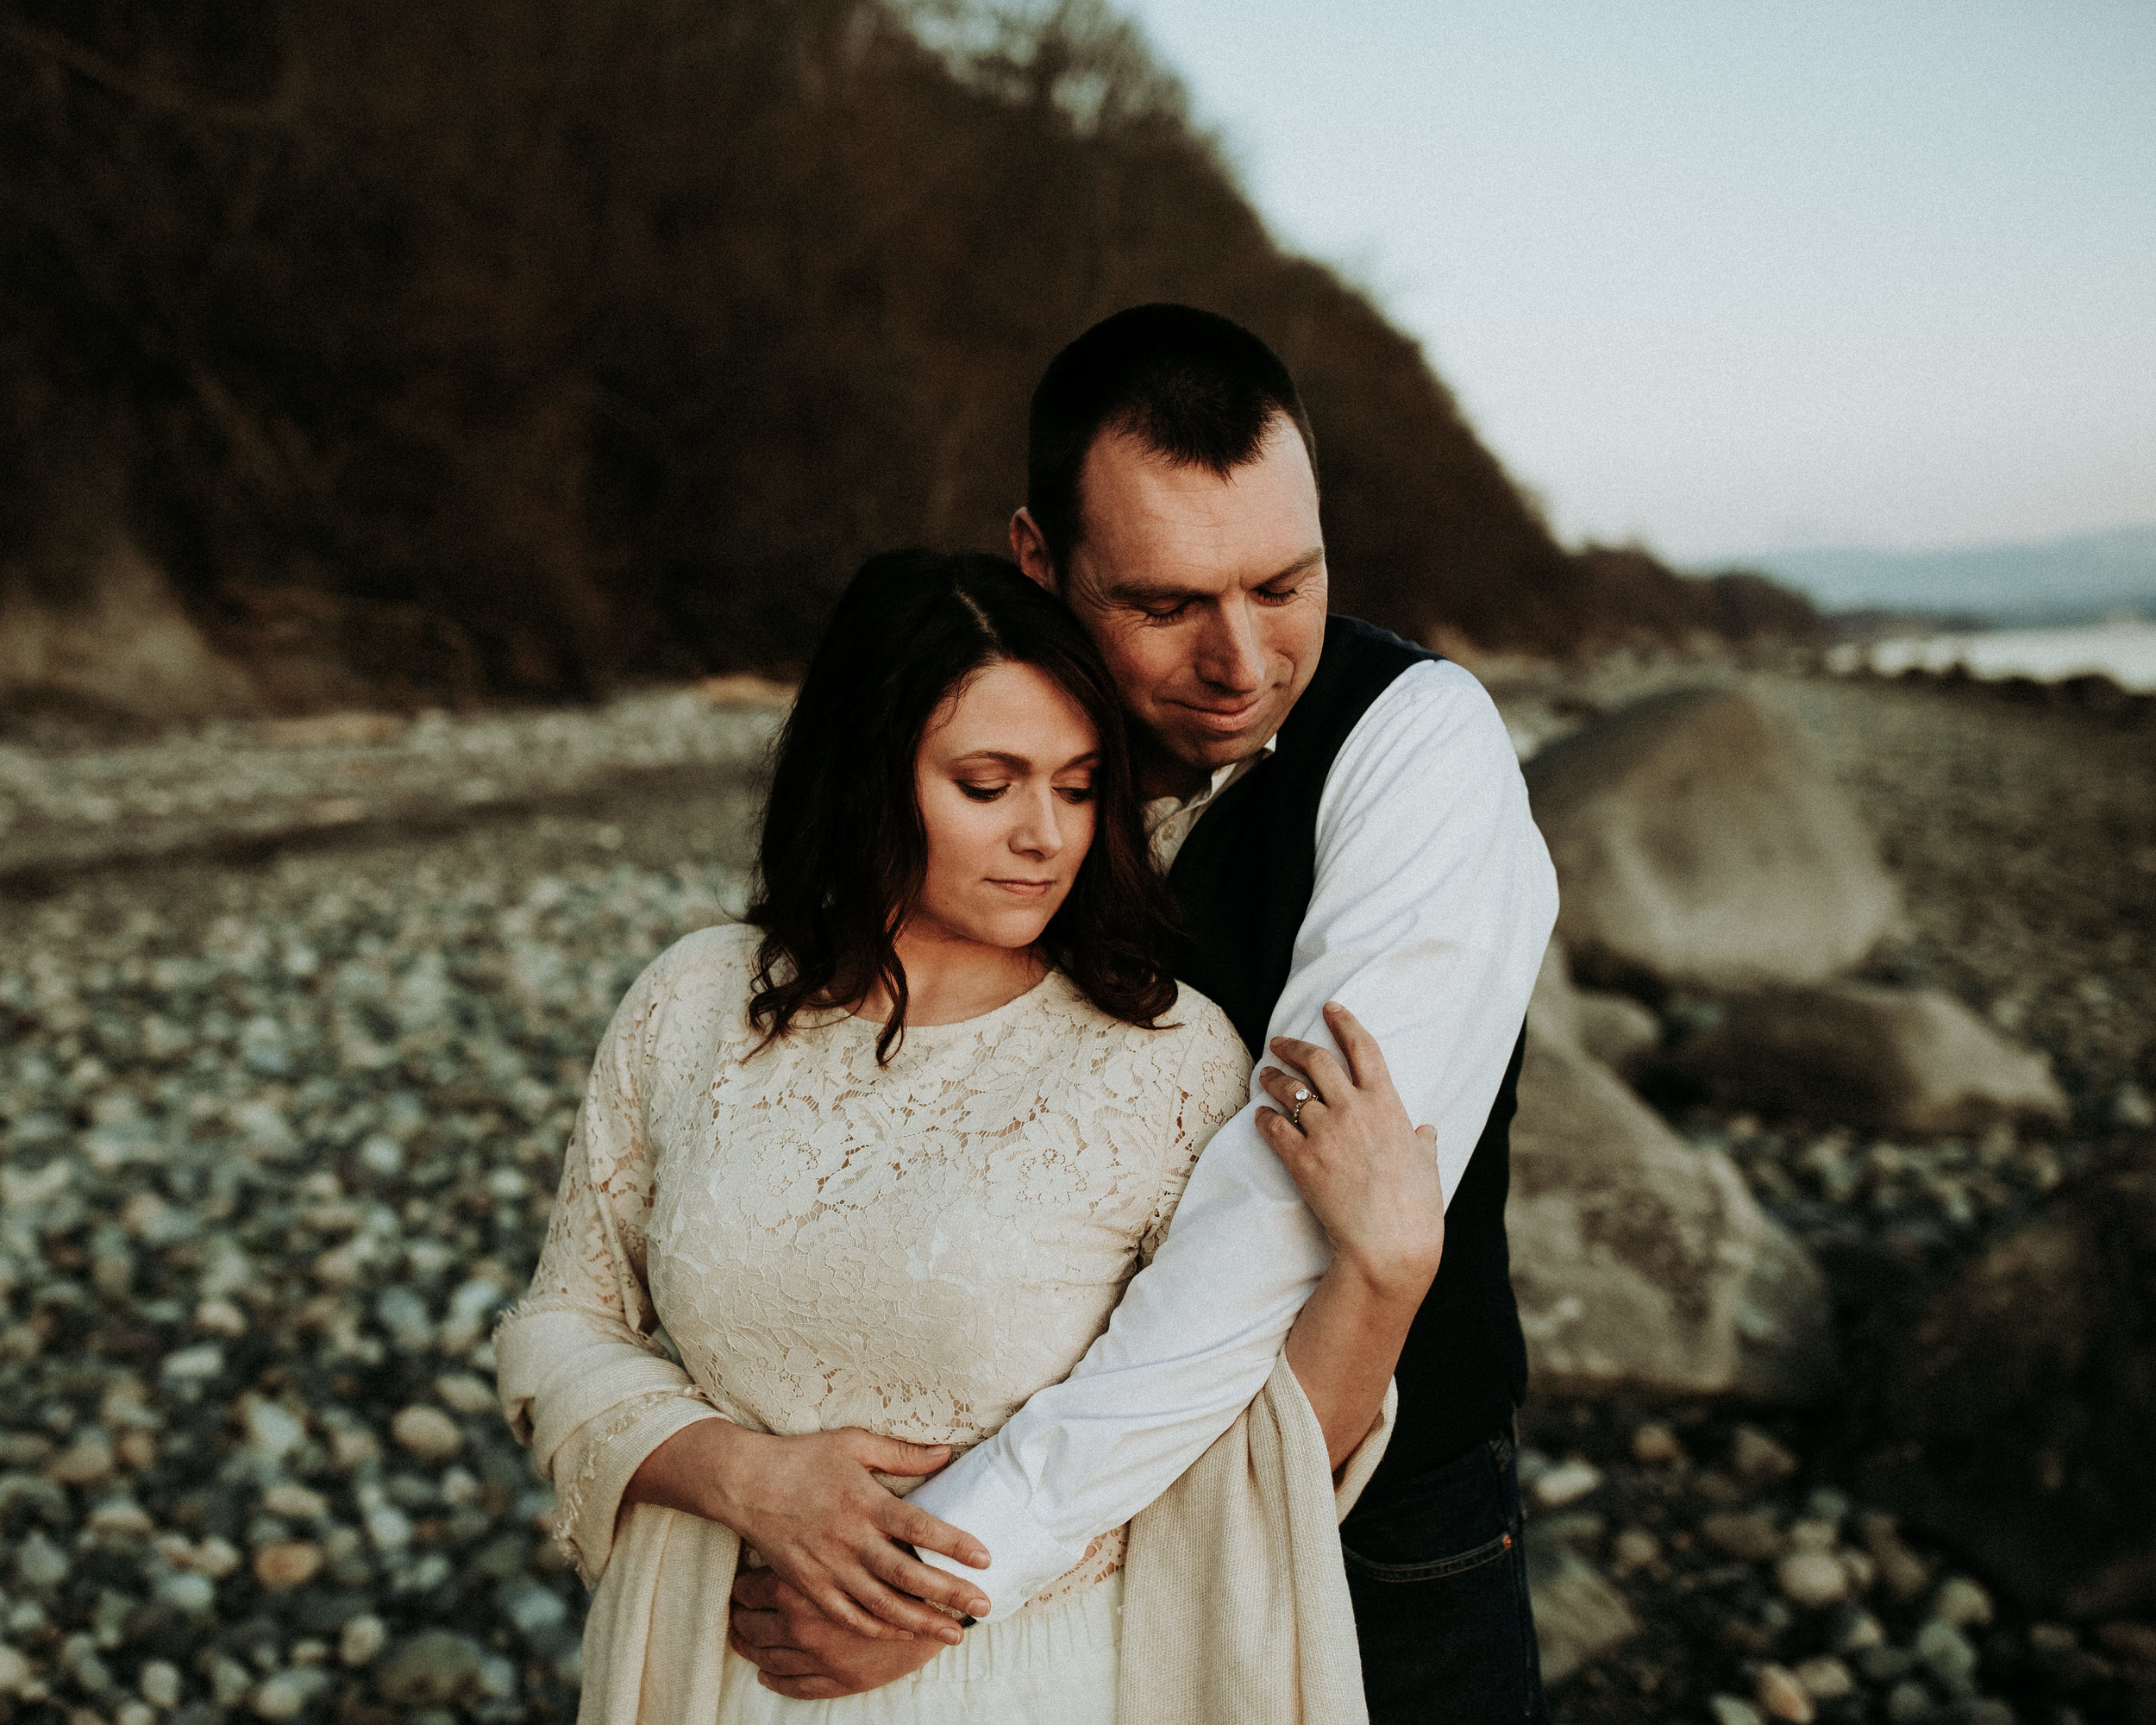 Engagement-Photographer-Bellingham-WA-Brianne-Bell-Photograpy-(Coral)-5.jpg